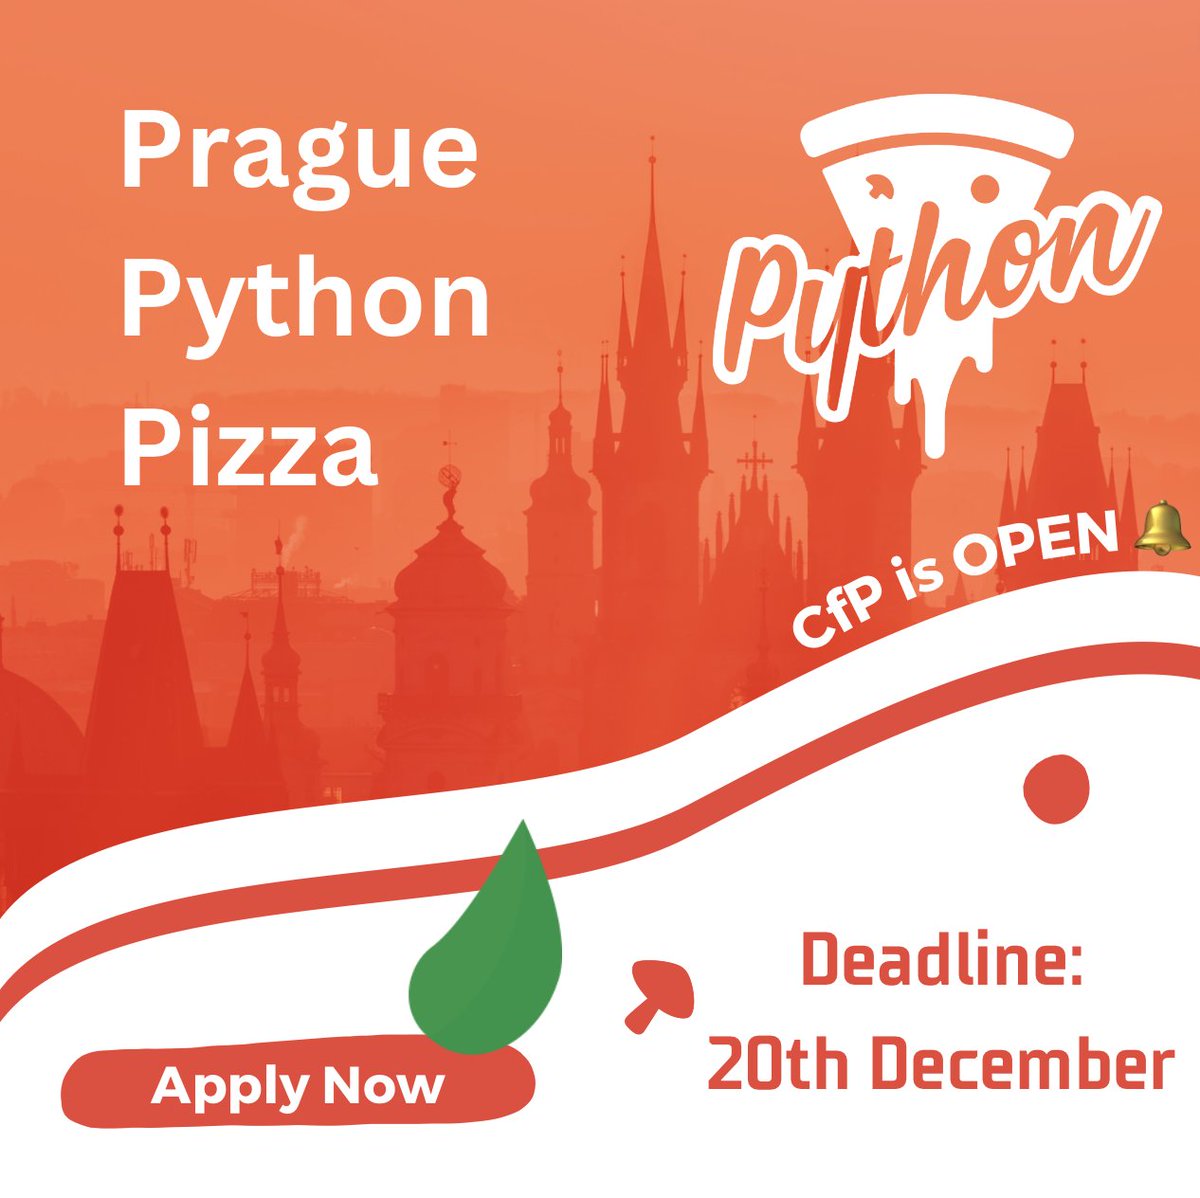 Python Pizza is coming to Prague!🐍 CfP is open for speakers and we’re looking forward to your submissions! The deadline is 20 Dec⏰ More details on the website: prague.python.pizza To receive updates, subscribe to our newsletter📰 Link in comments👇